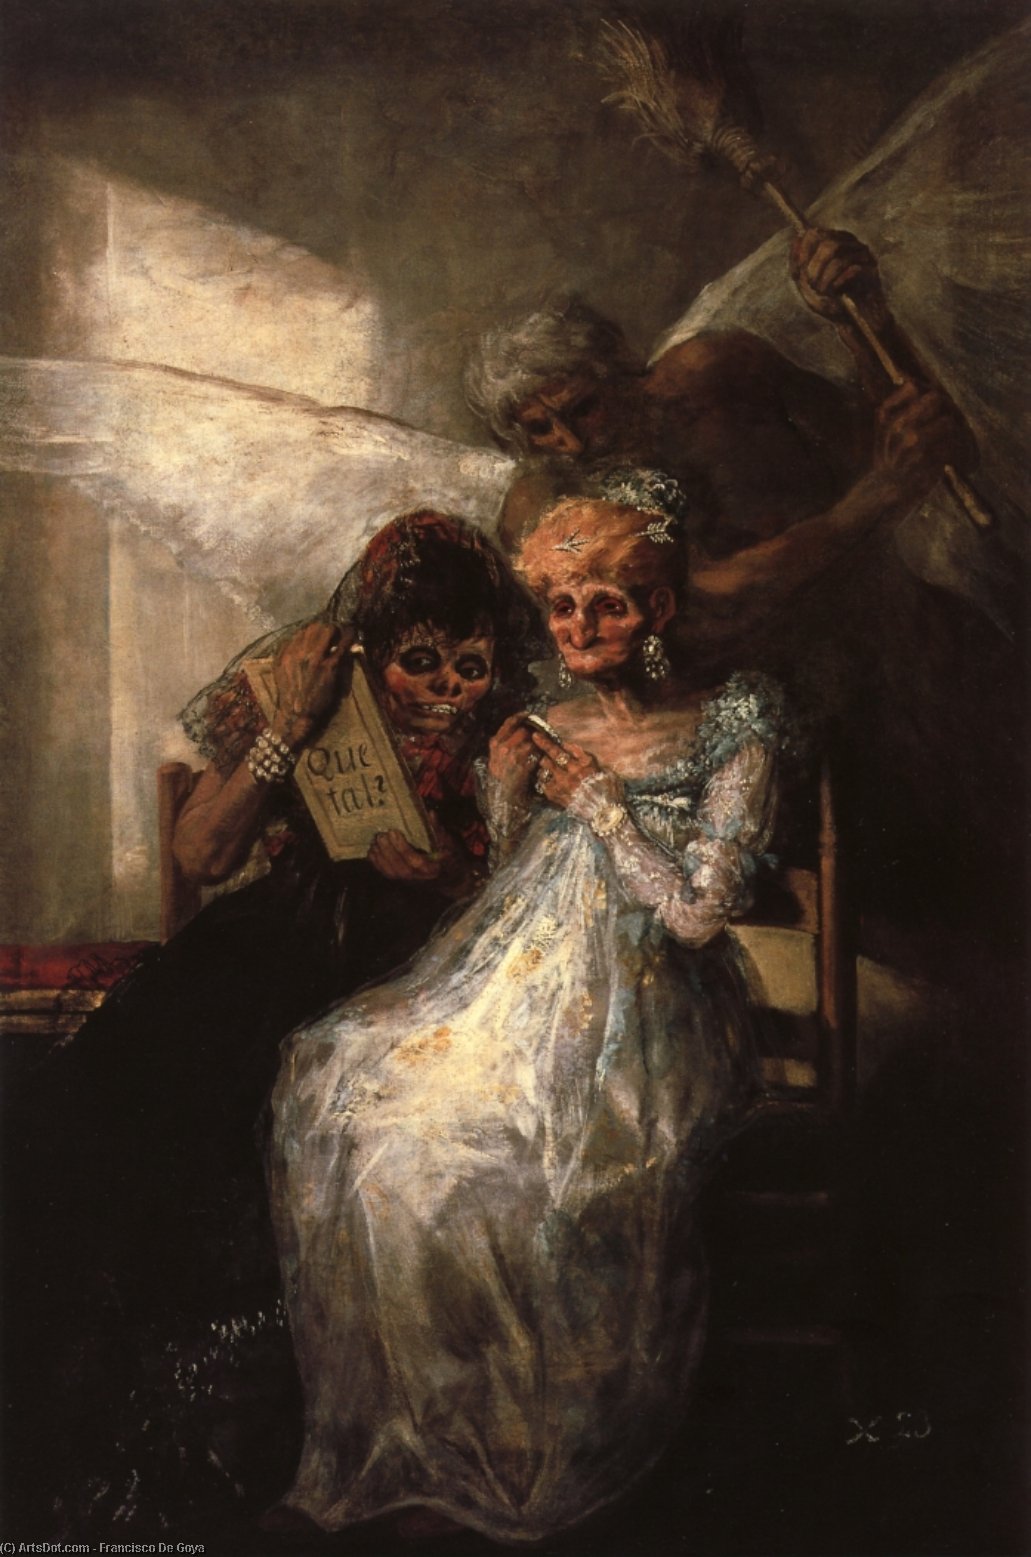 WikiOO.org - 백과 사전 - 회화, 삽화 Francisco De Goya - Time and the Old Women